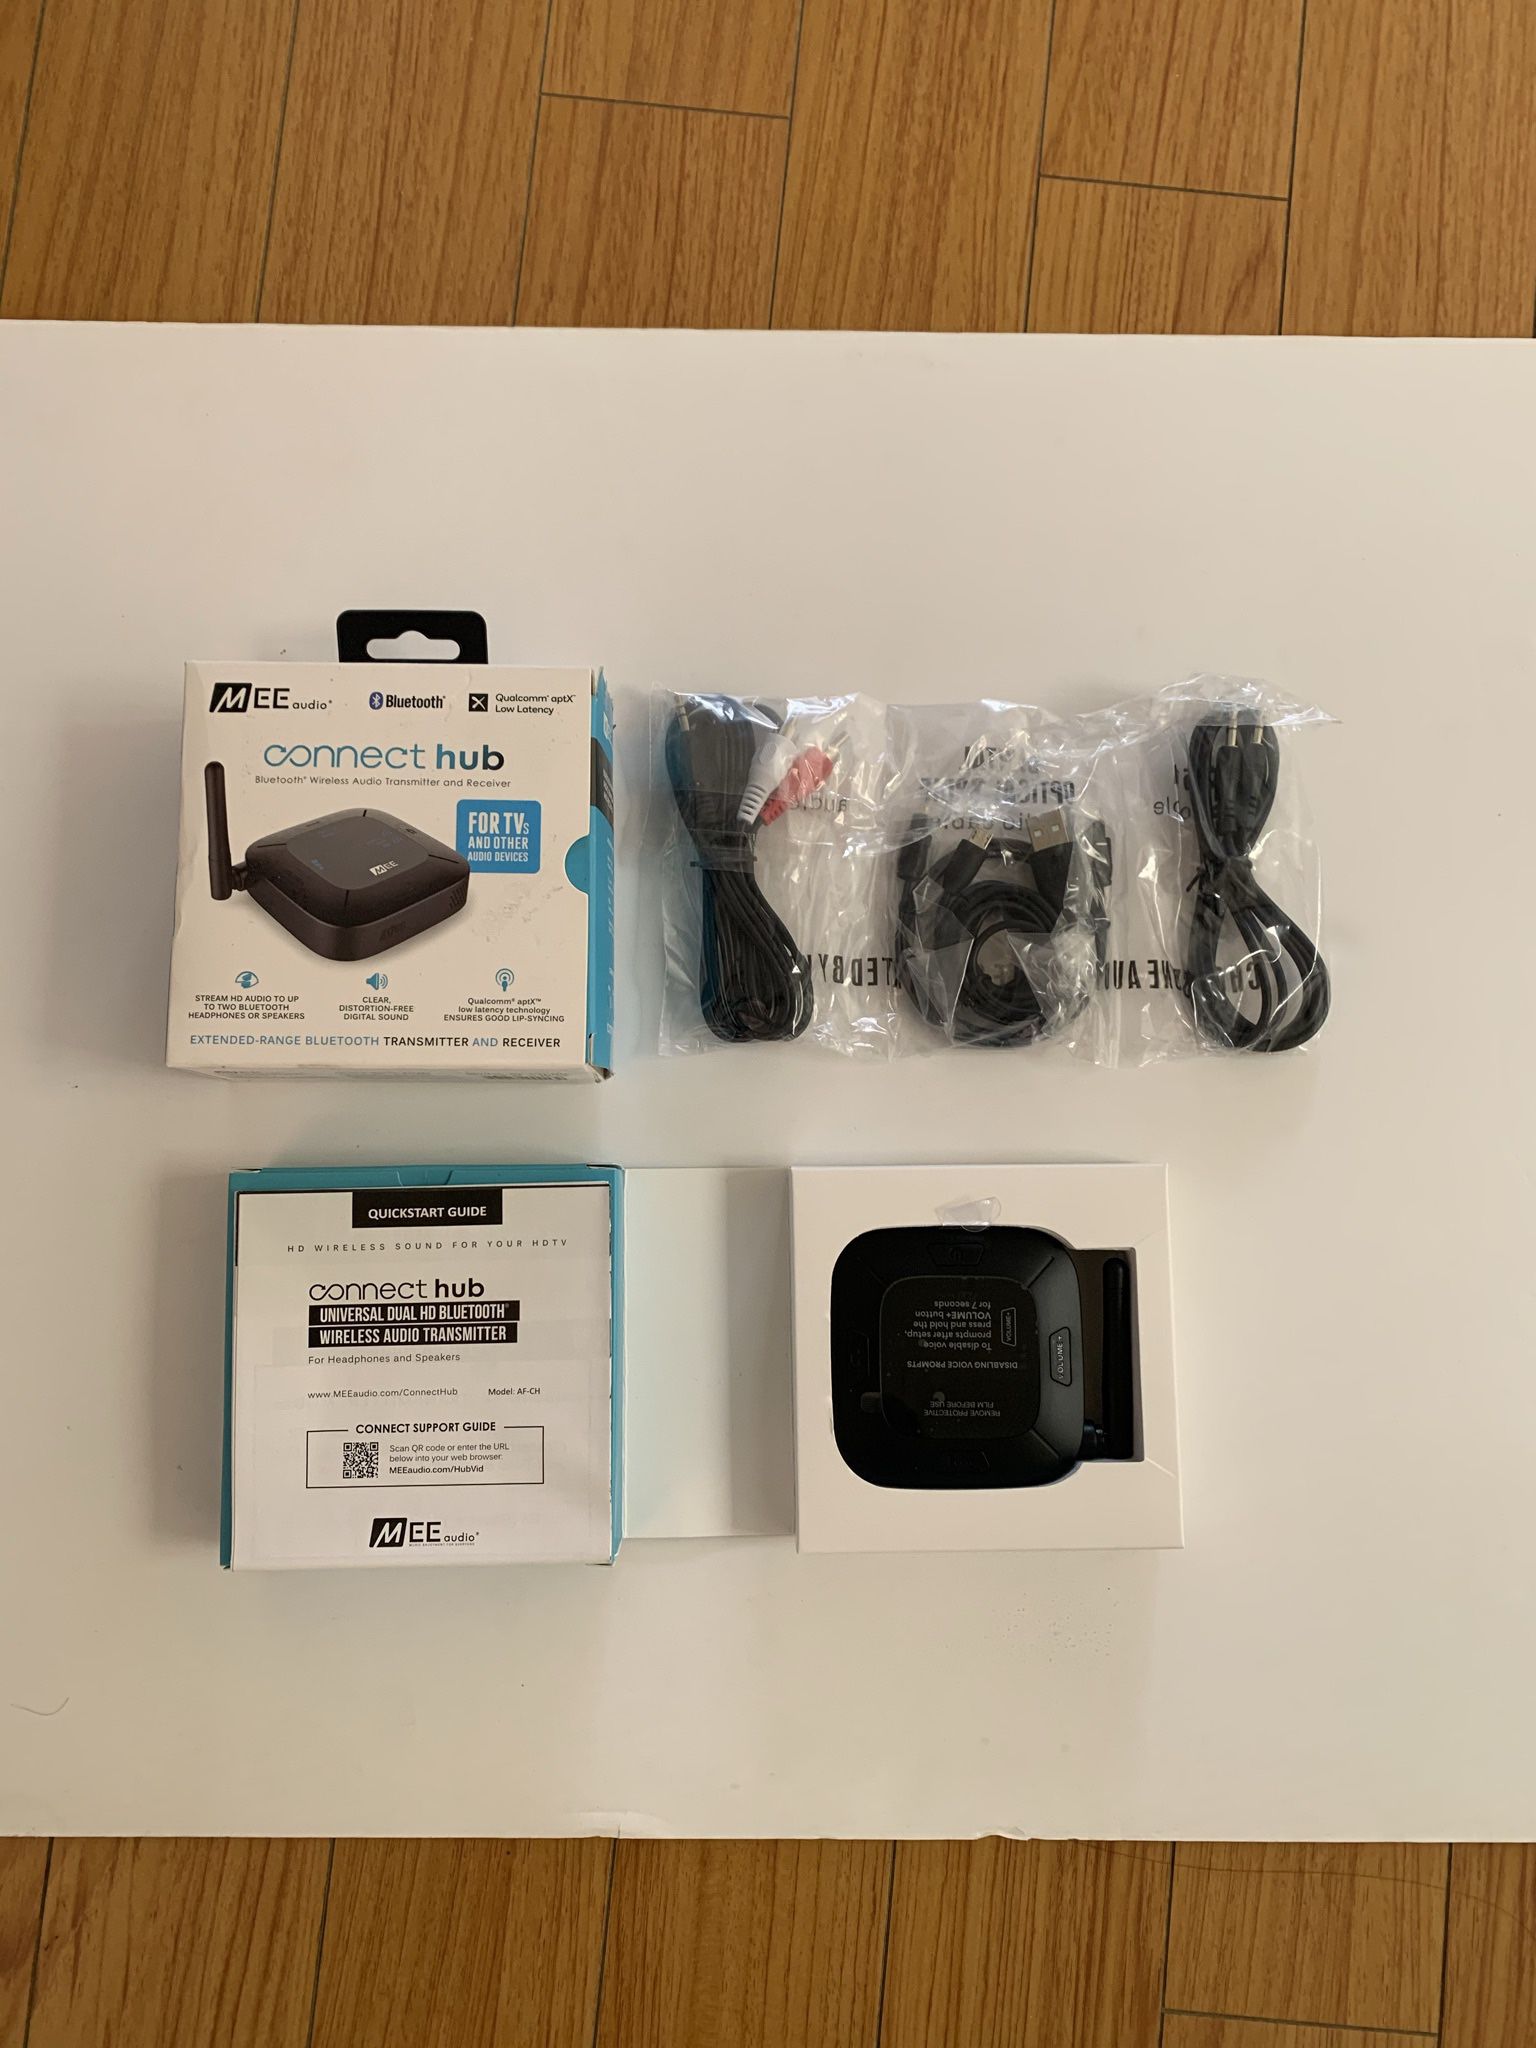 MEE audio - Connect Hub TV Bluetooth Audio Transmitter and Receiver for Headphones and Speakers